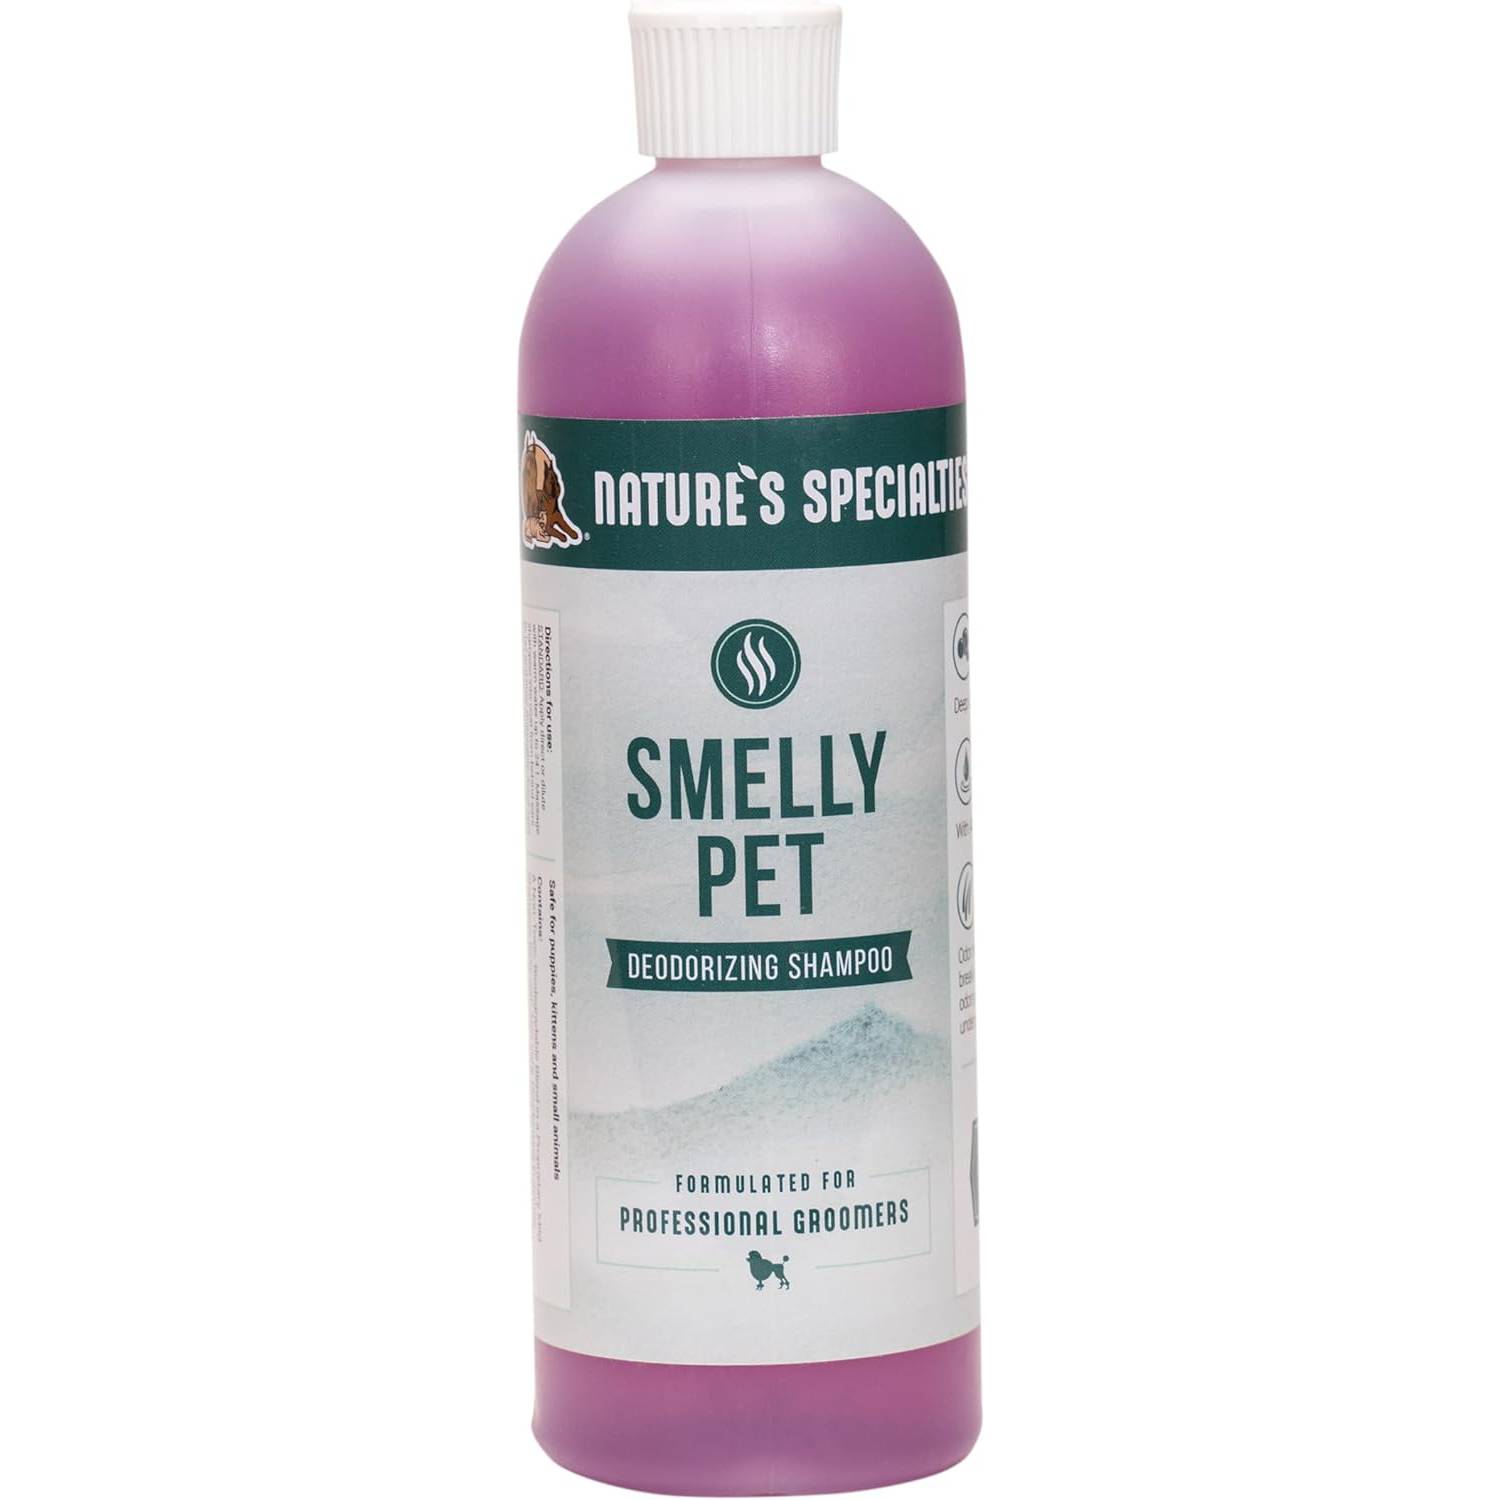 Nature’s Specialties Smelly Pet Dog Shampoo for Pets